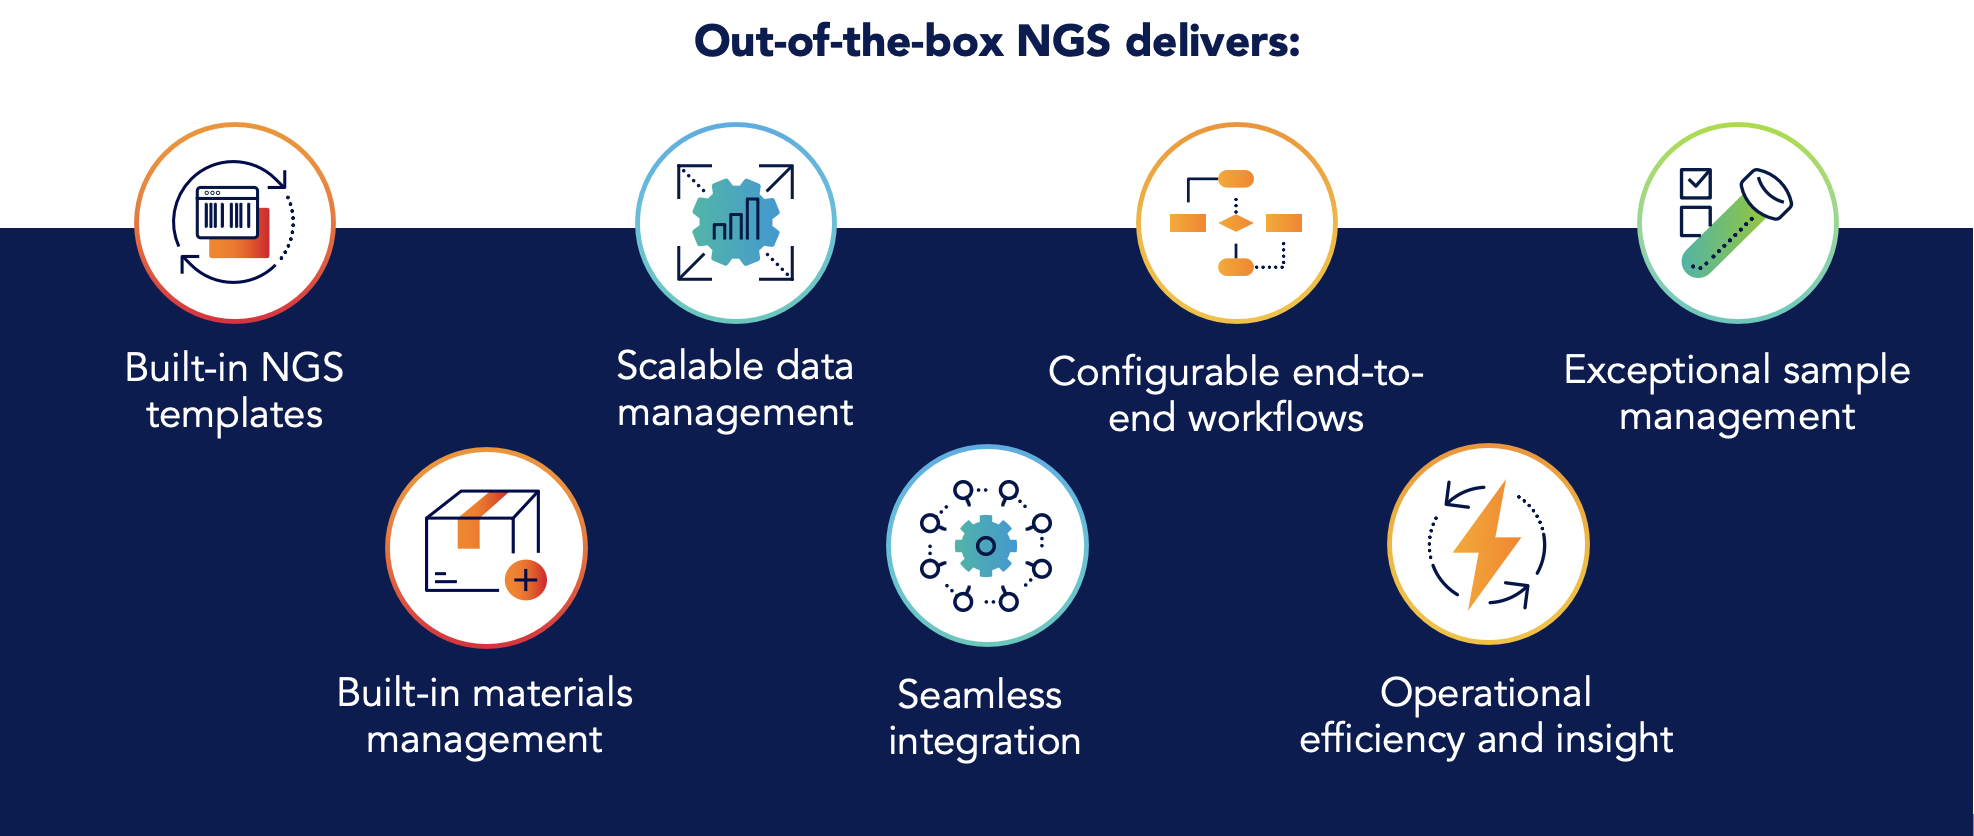 lims eln ngs out of the box benefits 1